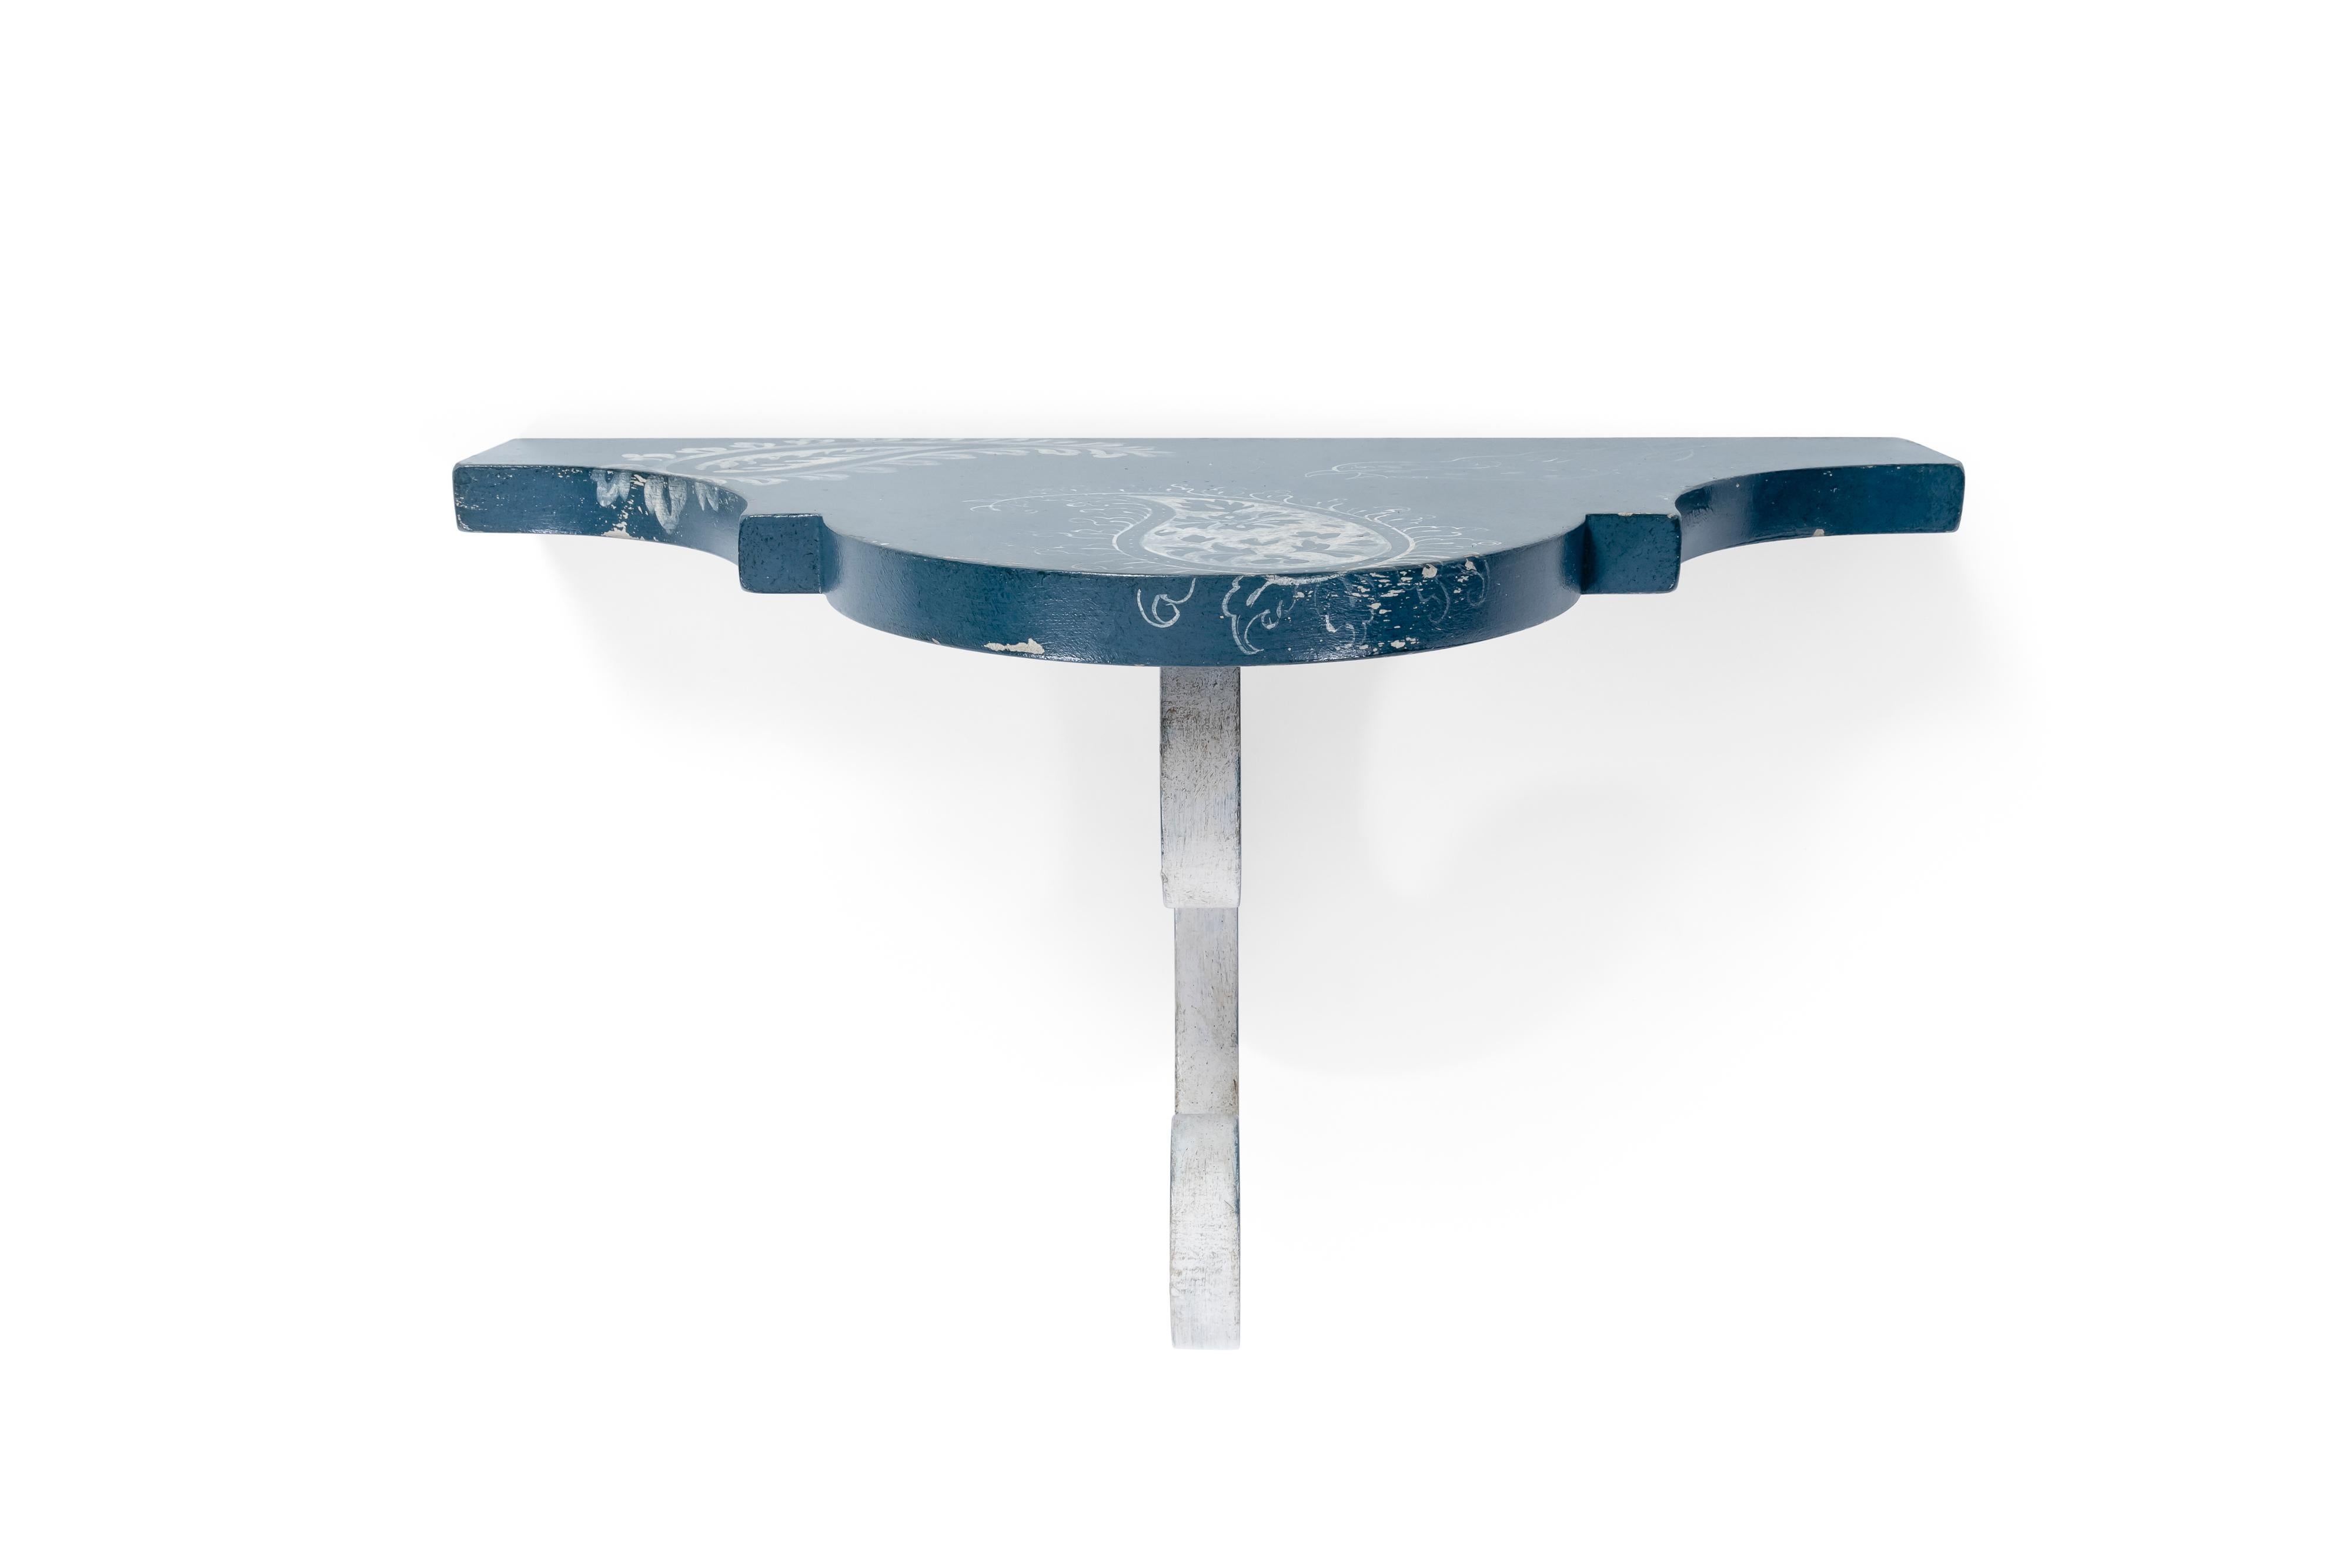 From our hand-painted Furniture Collection, we are pleased to introduce you to our Santa Croce Shelf.
Finished in an elegant deep sea blue with sweet monochromatic decors, this beautiful shelf will surely add that touch of sweet whimsy to any room